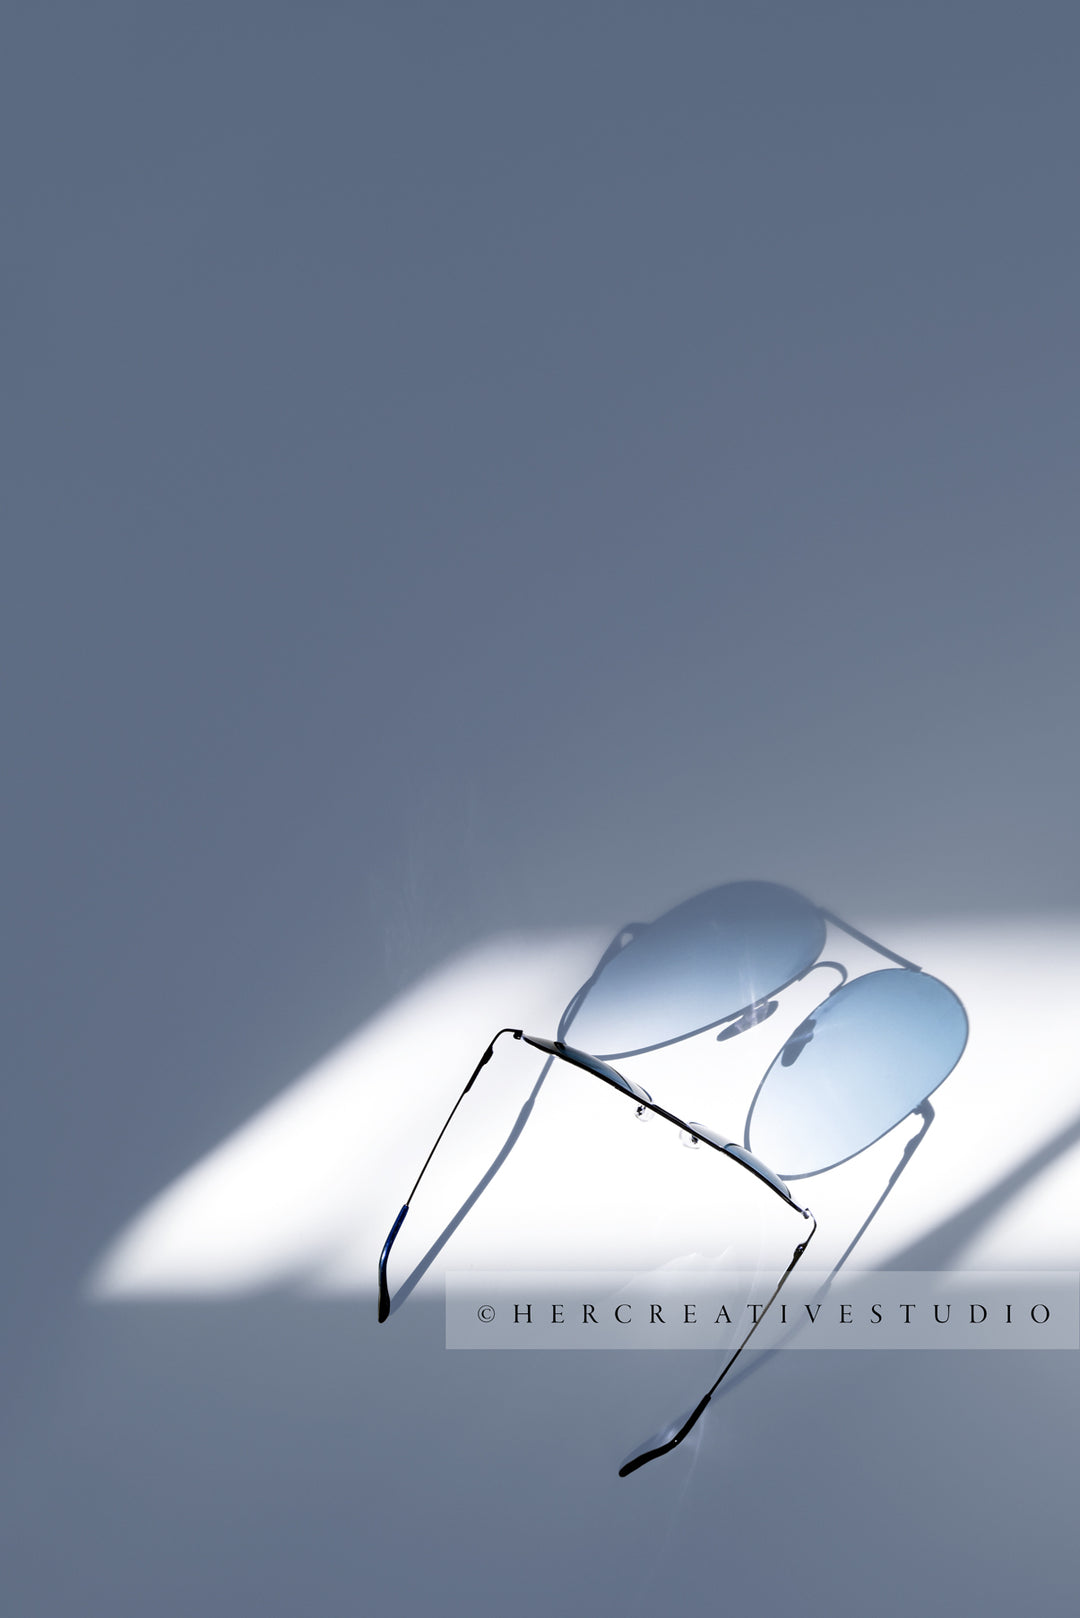 Sunglasses in Sunlight, Blue Hues, Styled Image